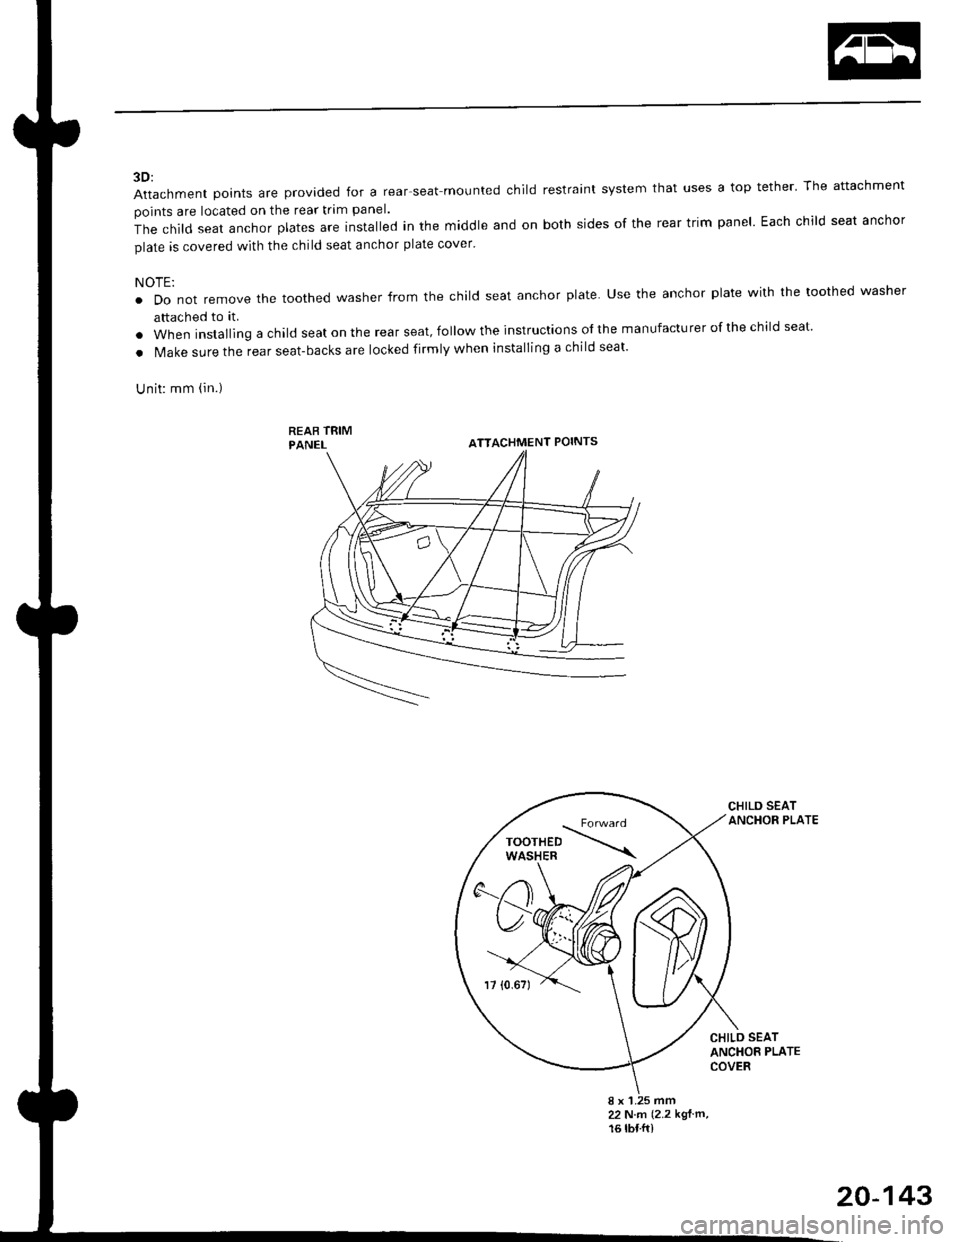 HONDA CIVIC 1998 6.G Workshop Manual 3D:
Attachment points are provided for a rear-seat mounted child restraint system that uses a top tether The attachment
points are located on the rear trim panel.
The child seat anchor plates are rns